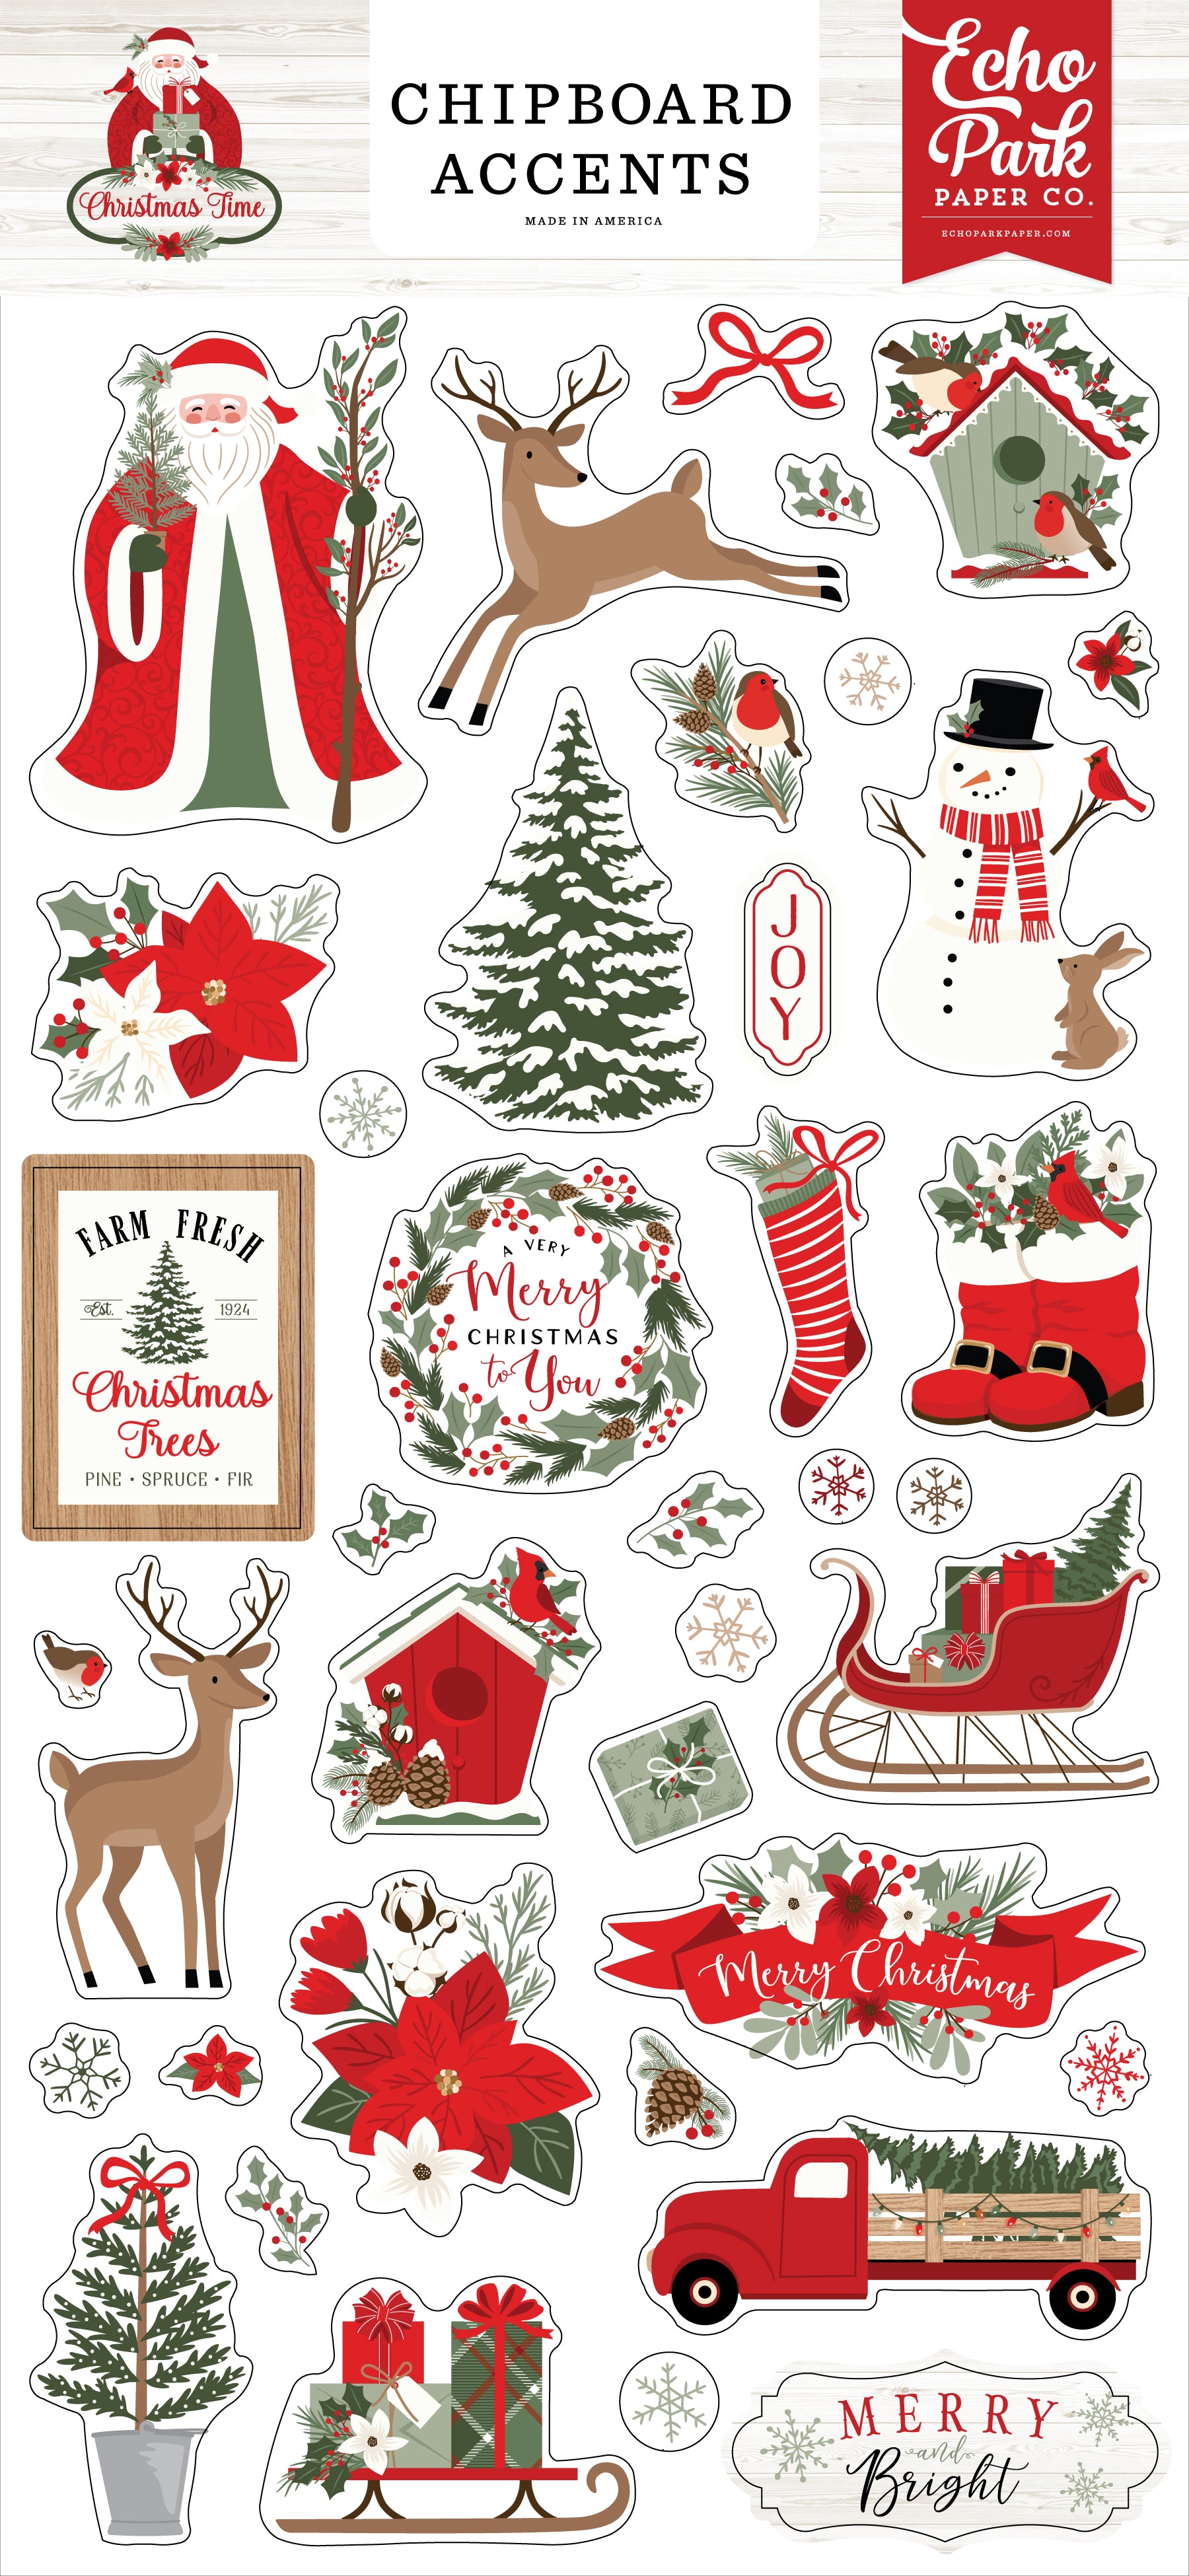 Christmas Time Collection 6 x 12 Scrapbook Chipboard Accents by Echo Park Paper